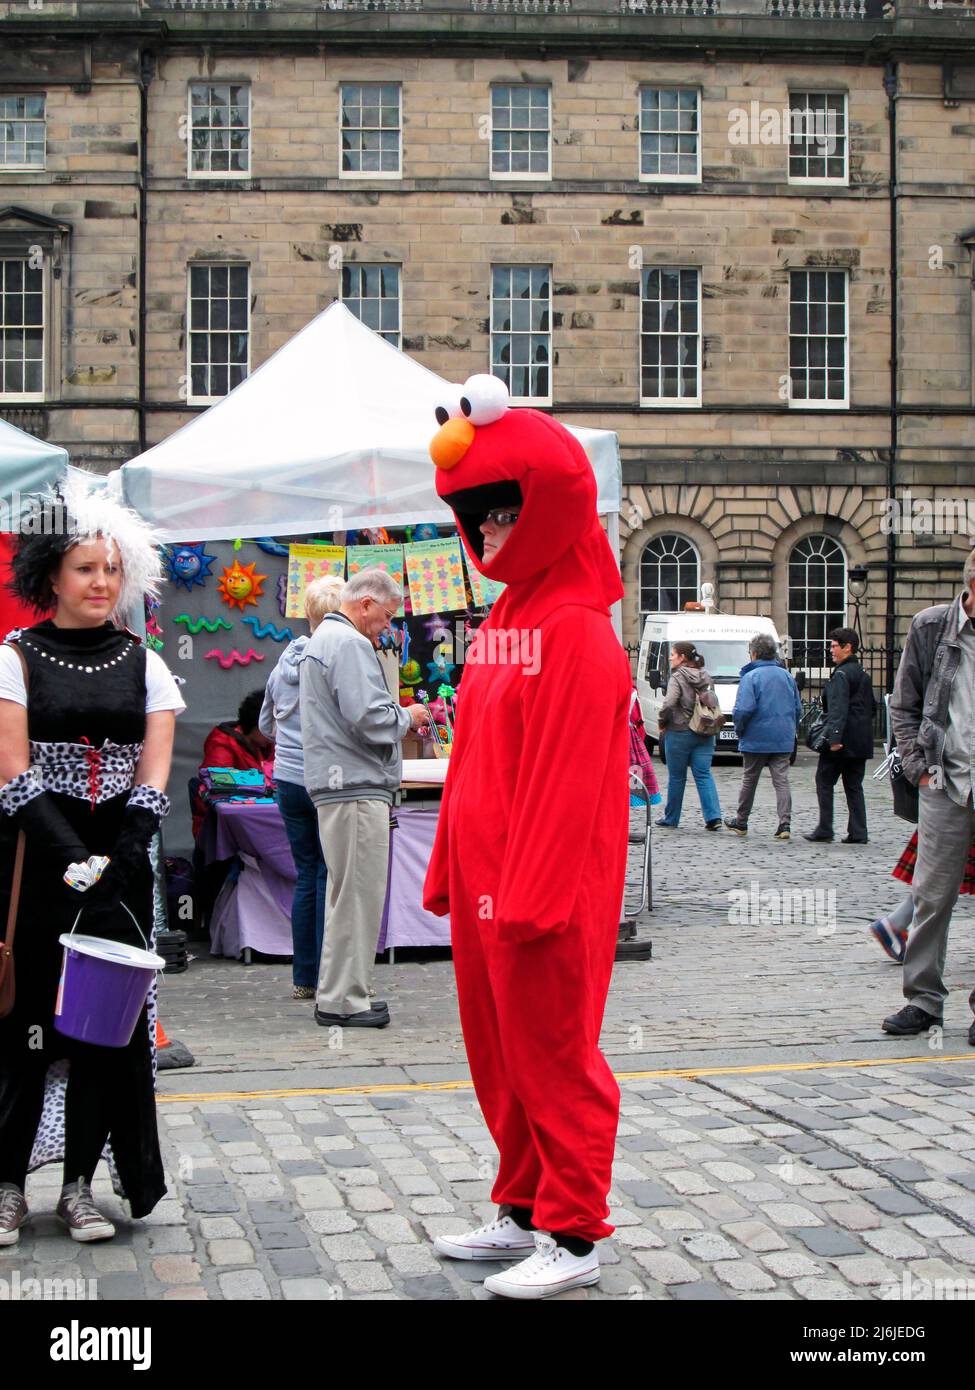 ROYAL MILE. EDINBURGH. SCOTLAND. 19-08013. All things, all shapes and all characters can be seen at Fringe time oin the Royal Mile. Stock Photo